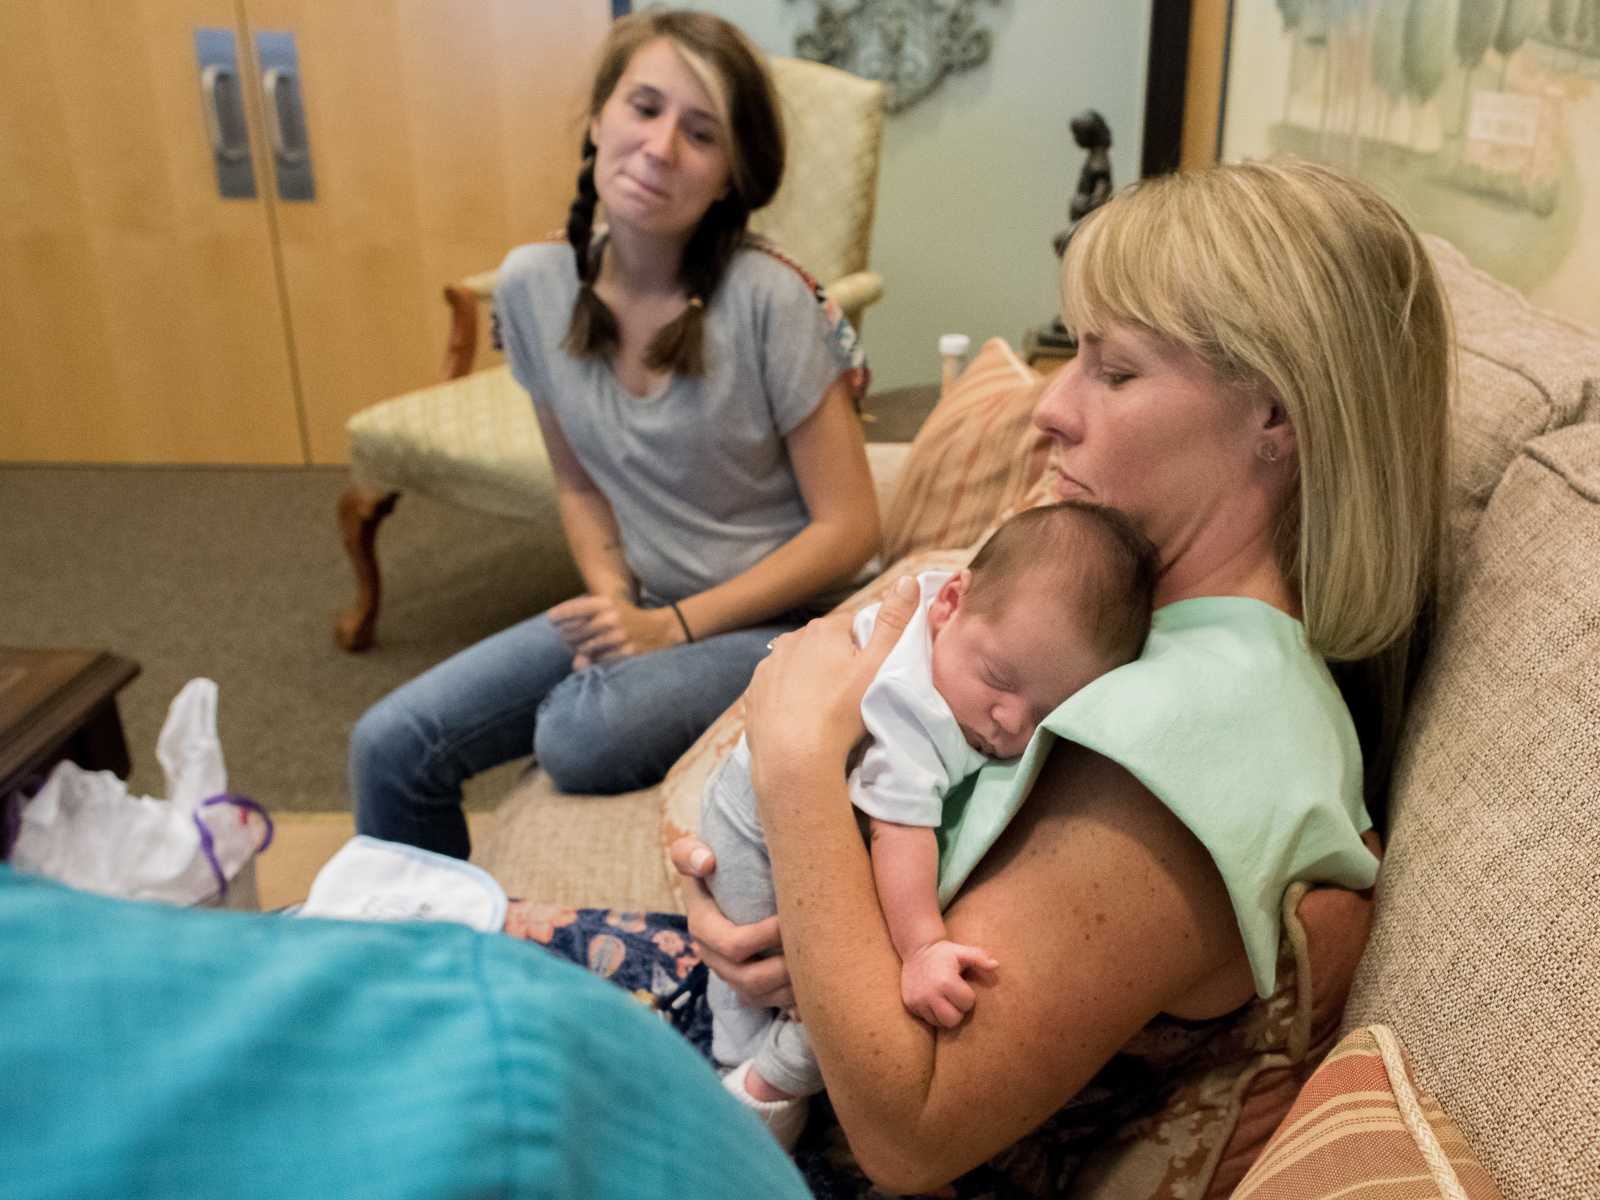 adopted mother sits on couch with baby to her chest while birth mother smiles next to her